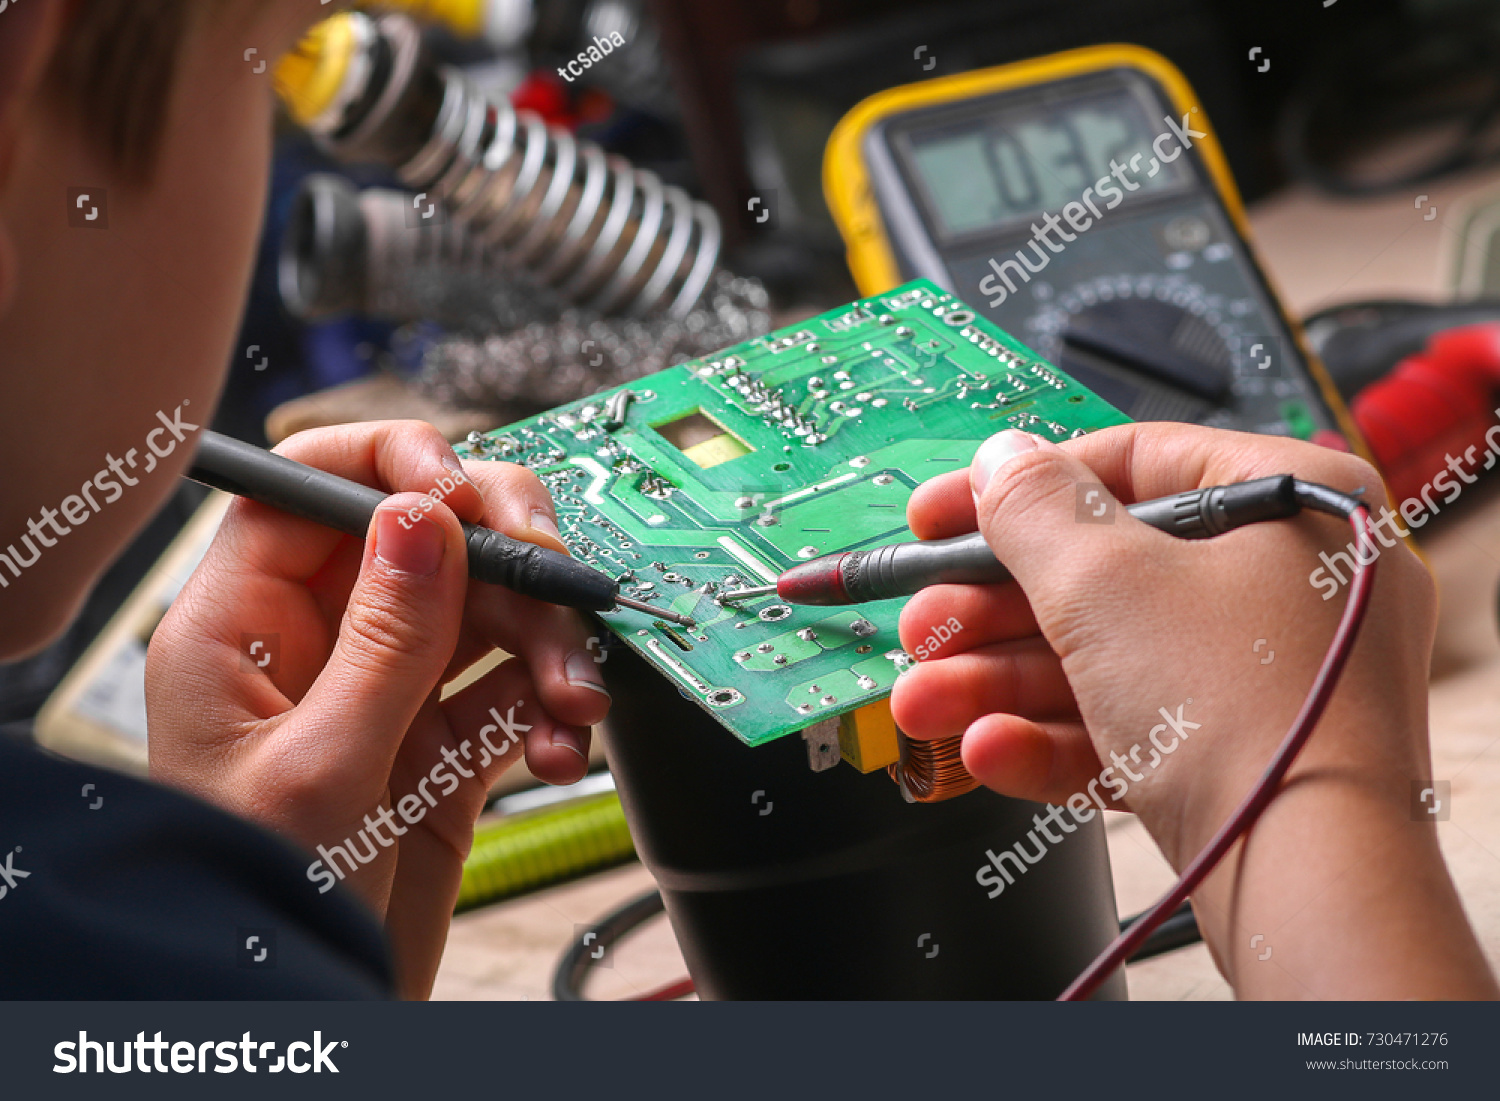 Repair of electronic devices, tin soldering parts #730471276